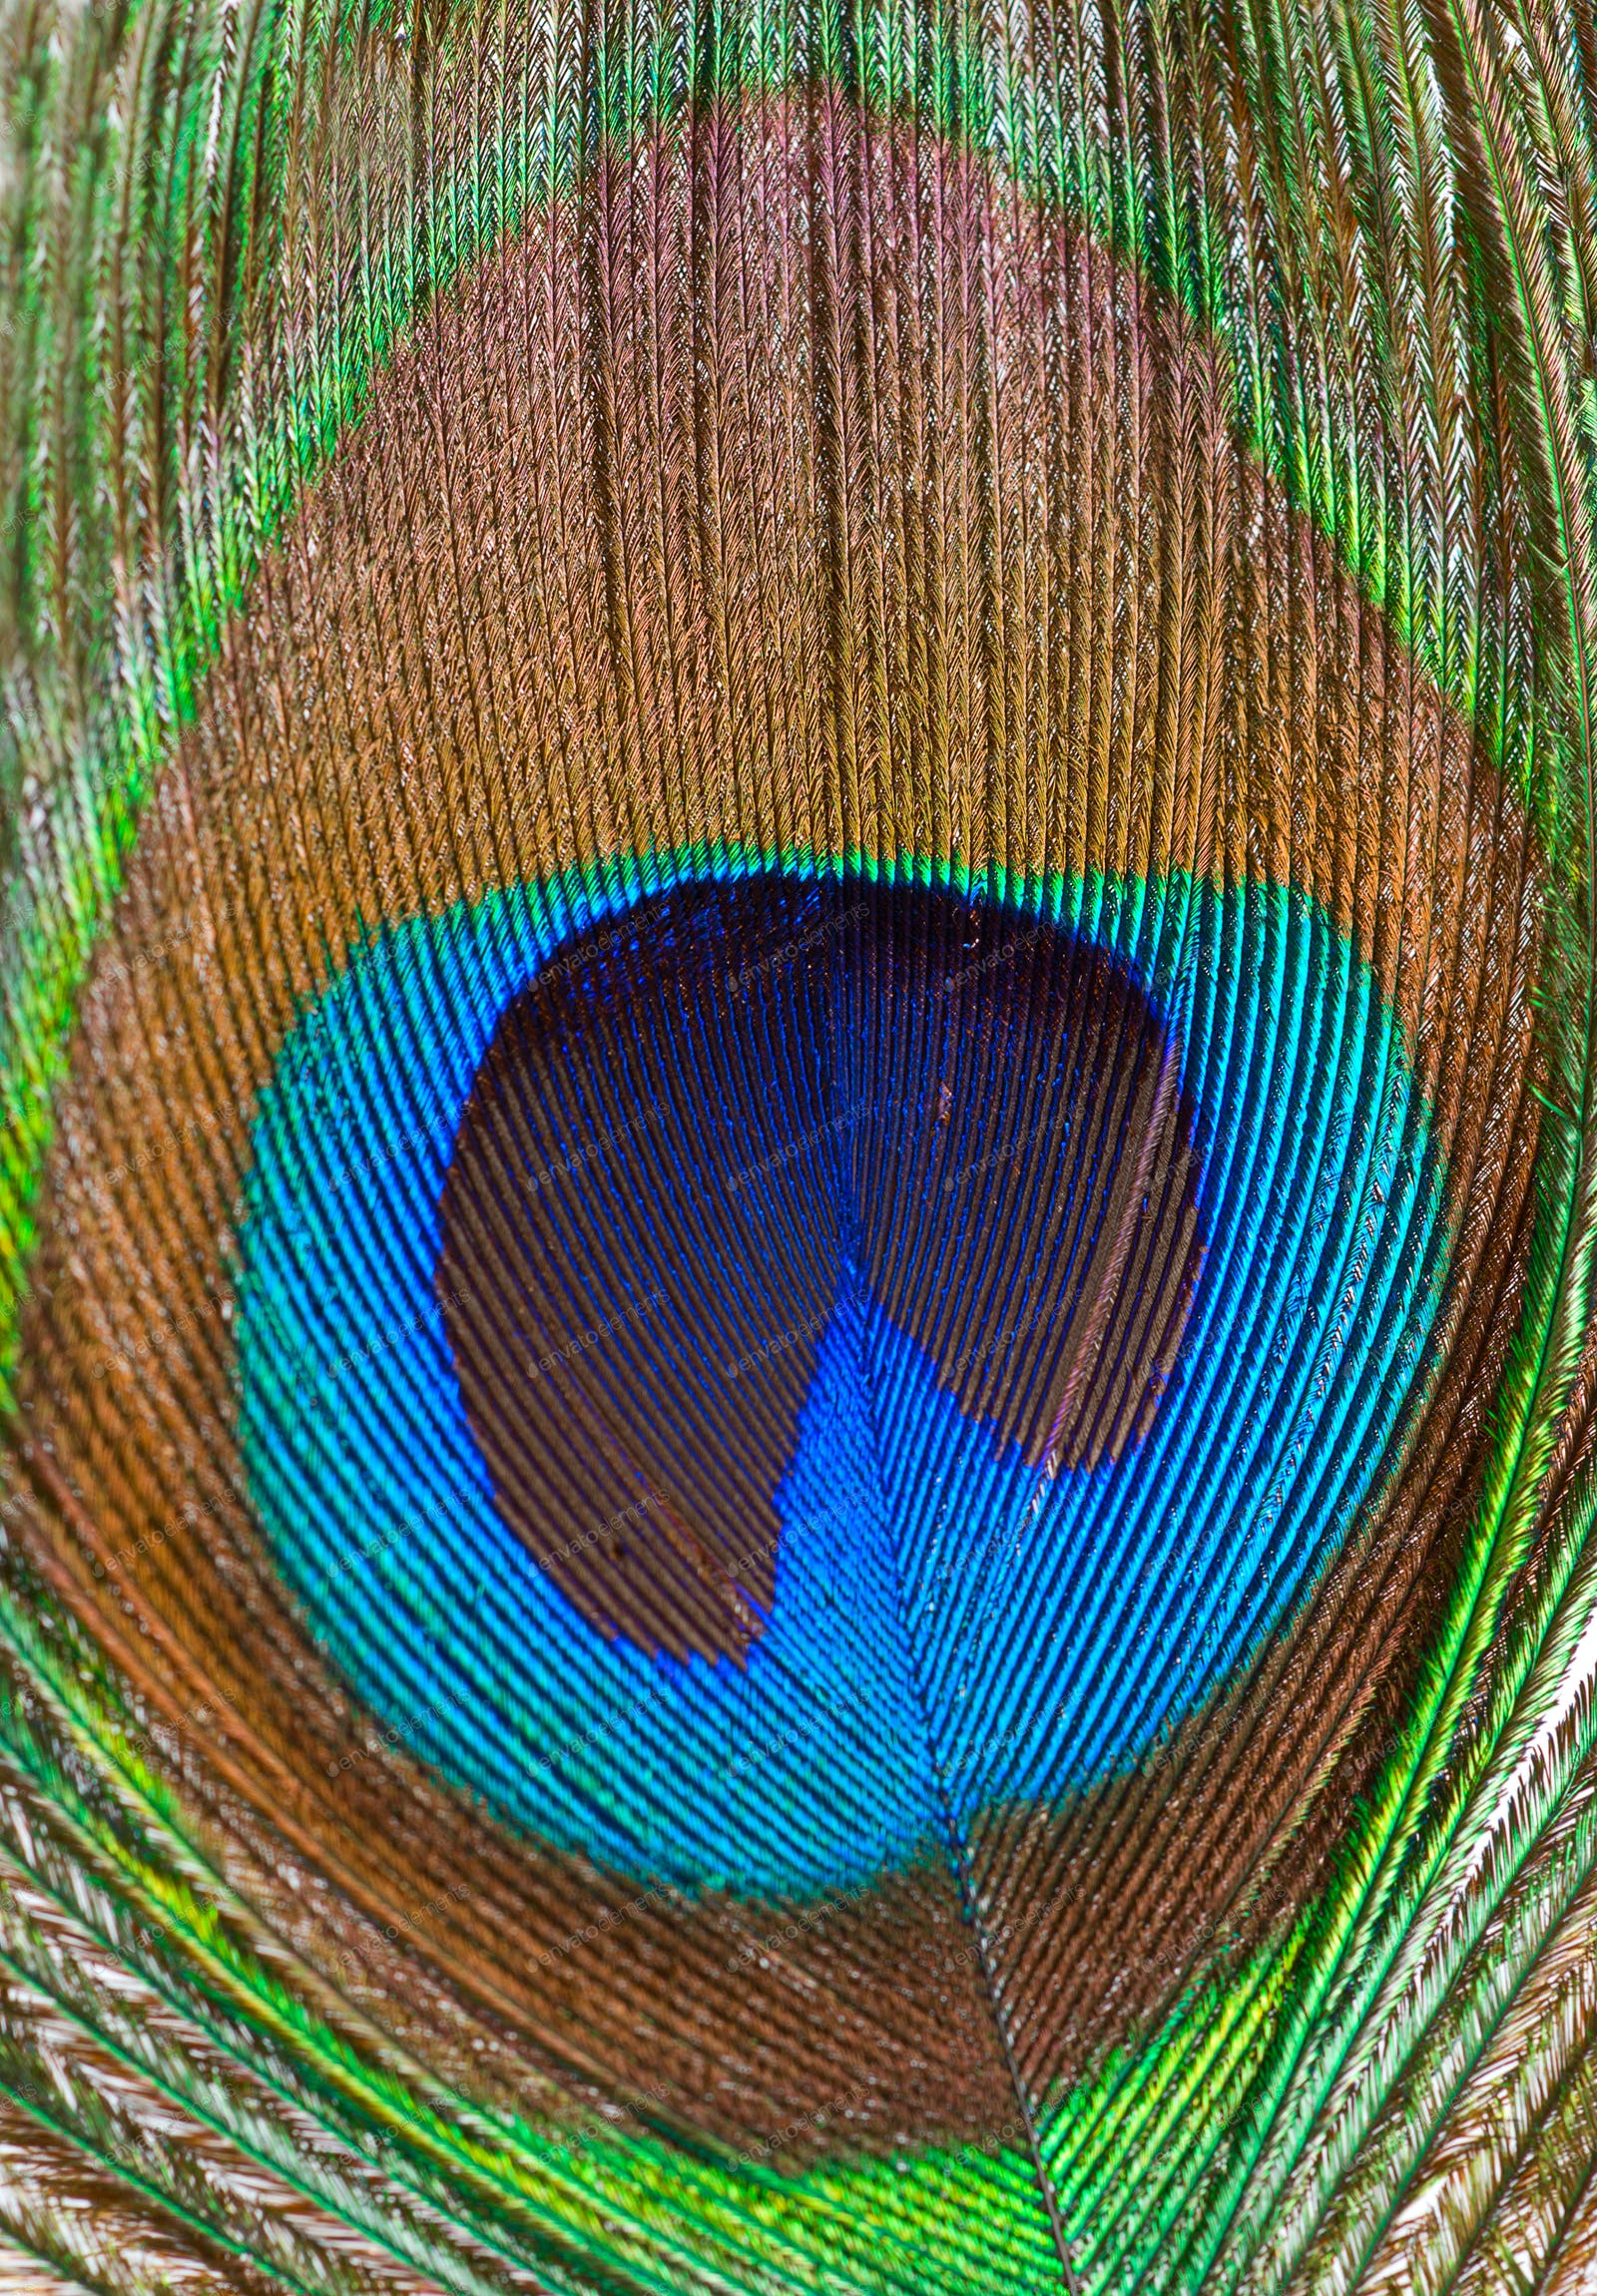 Peacock feather closeup photo by Givaga on Envato Elements